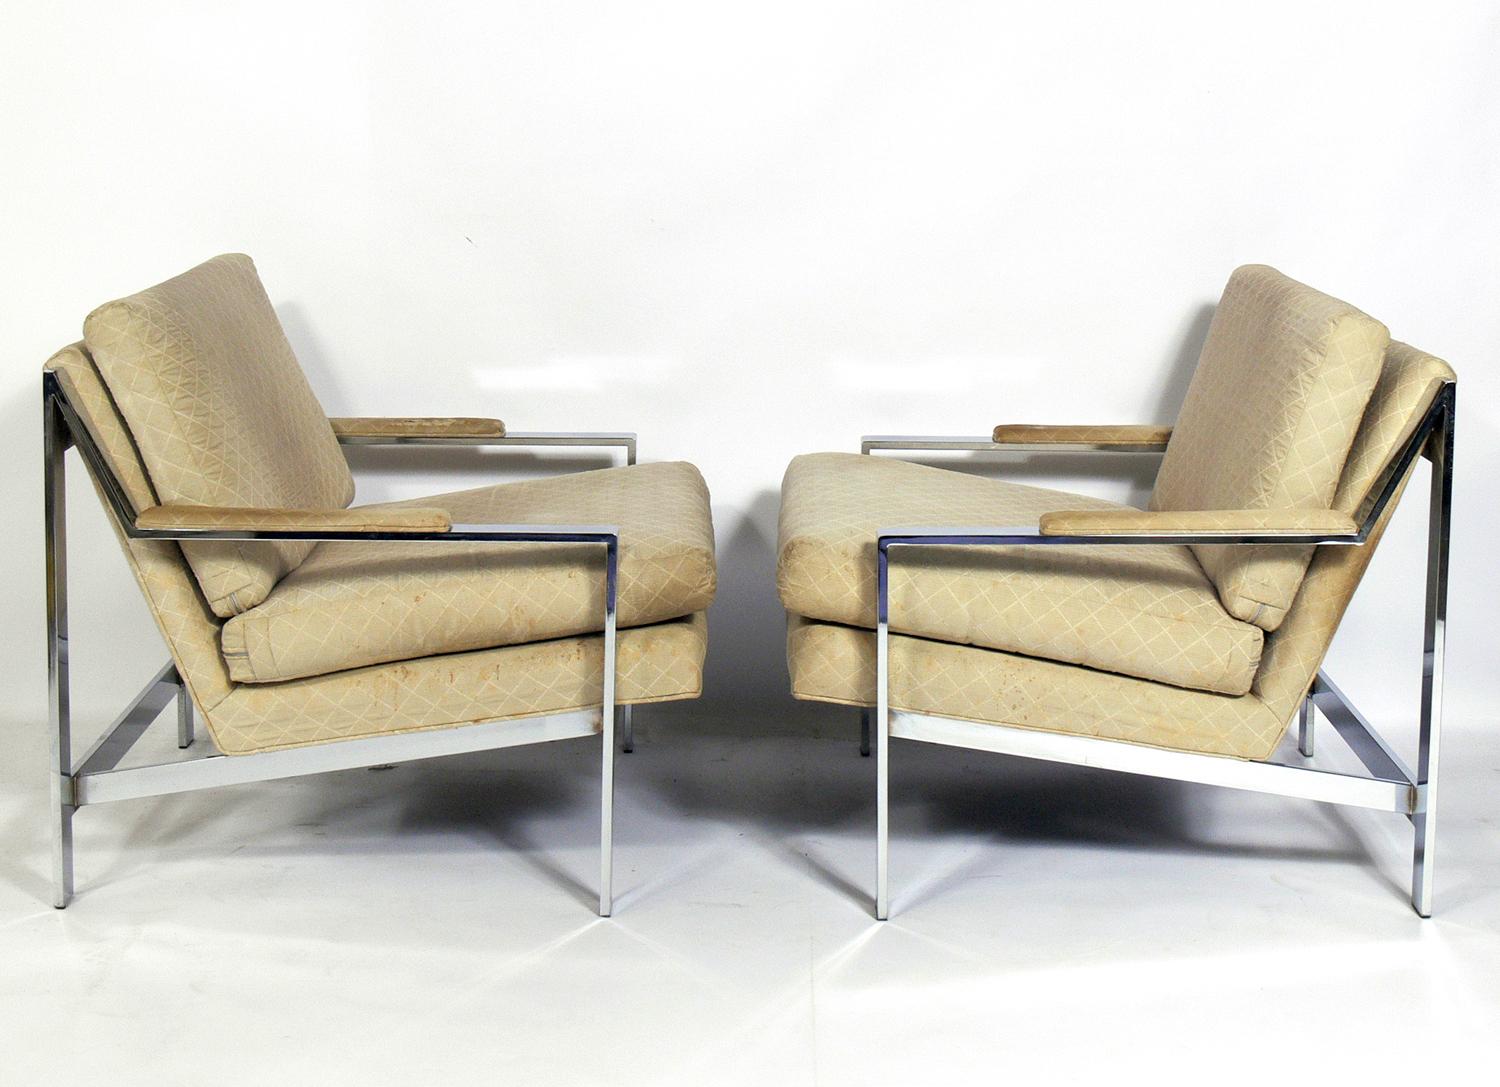 Pair of chrome lounge chairs by Cy Mann, American, circa 1960s. For years these chairs were attributed to Milo Baughman. These chairs are currently being reupholstered and can be completed in your fabric at no additional charge. The price noted